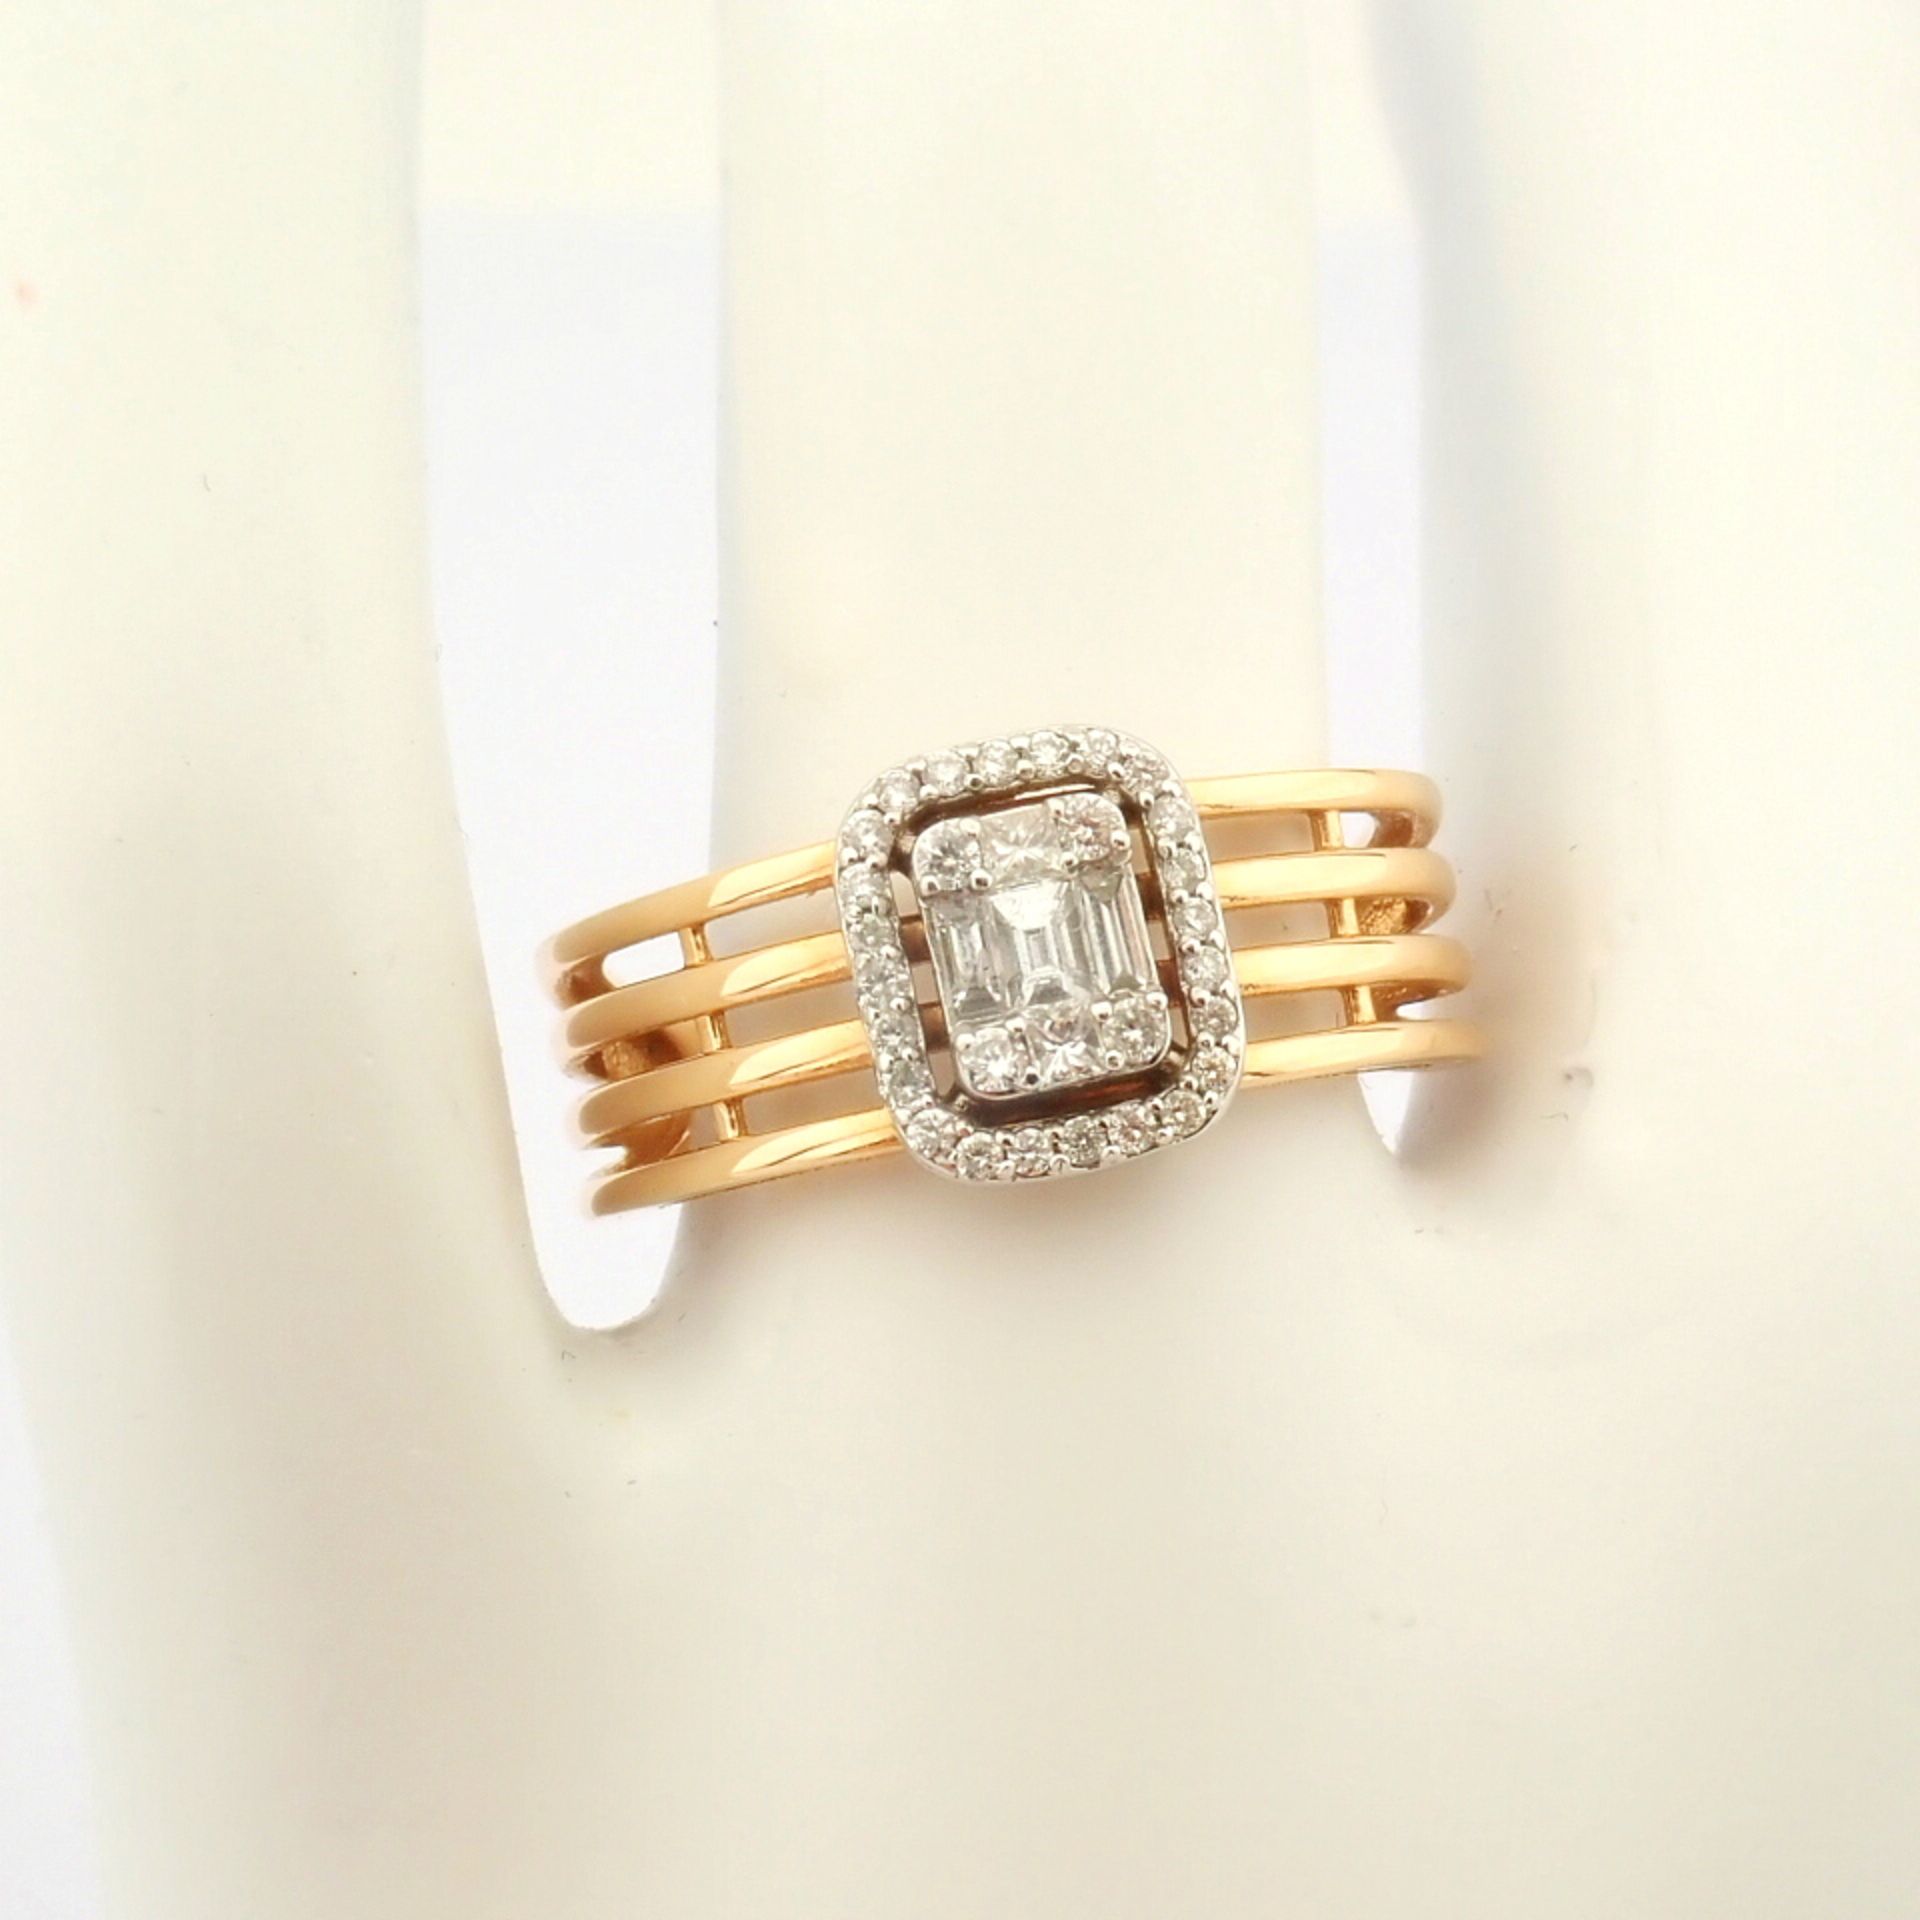 Certificated 14K White and Rose Gold Baguette Diamond & Diamond Ring (Total 0.31 ct Stone) - Image 6 of 6